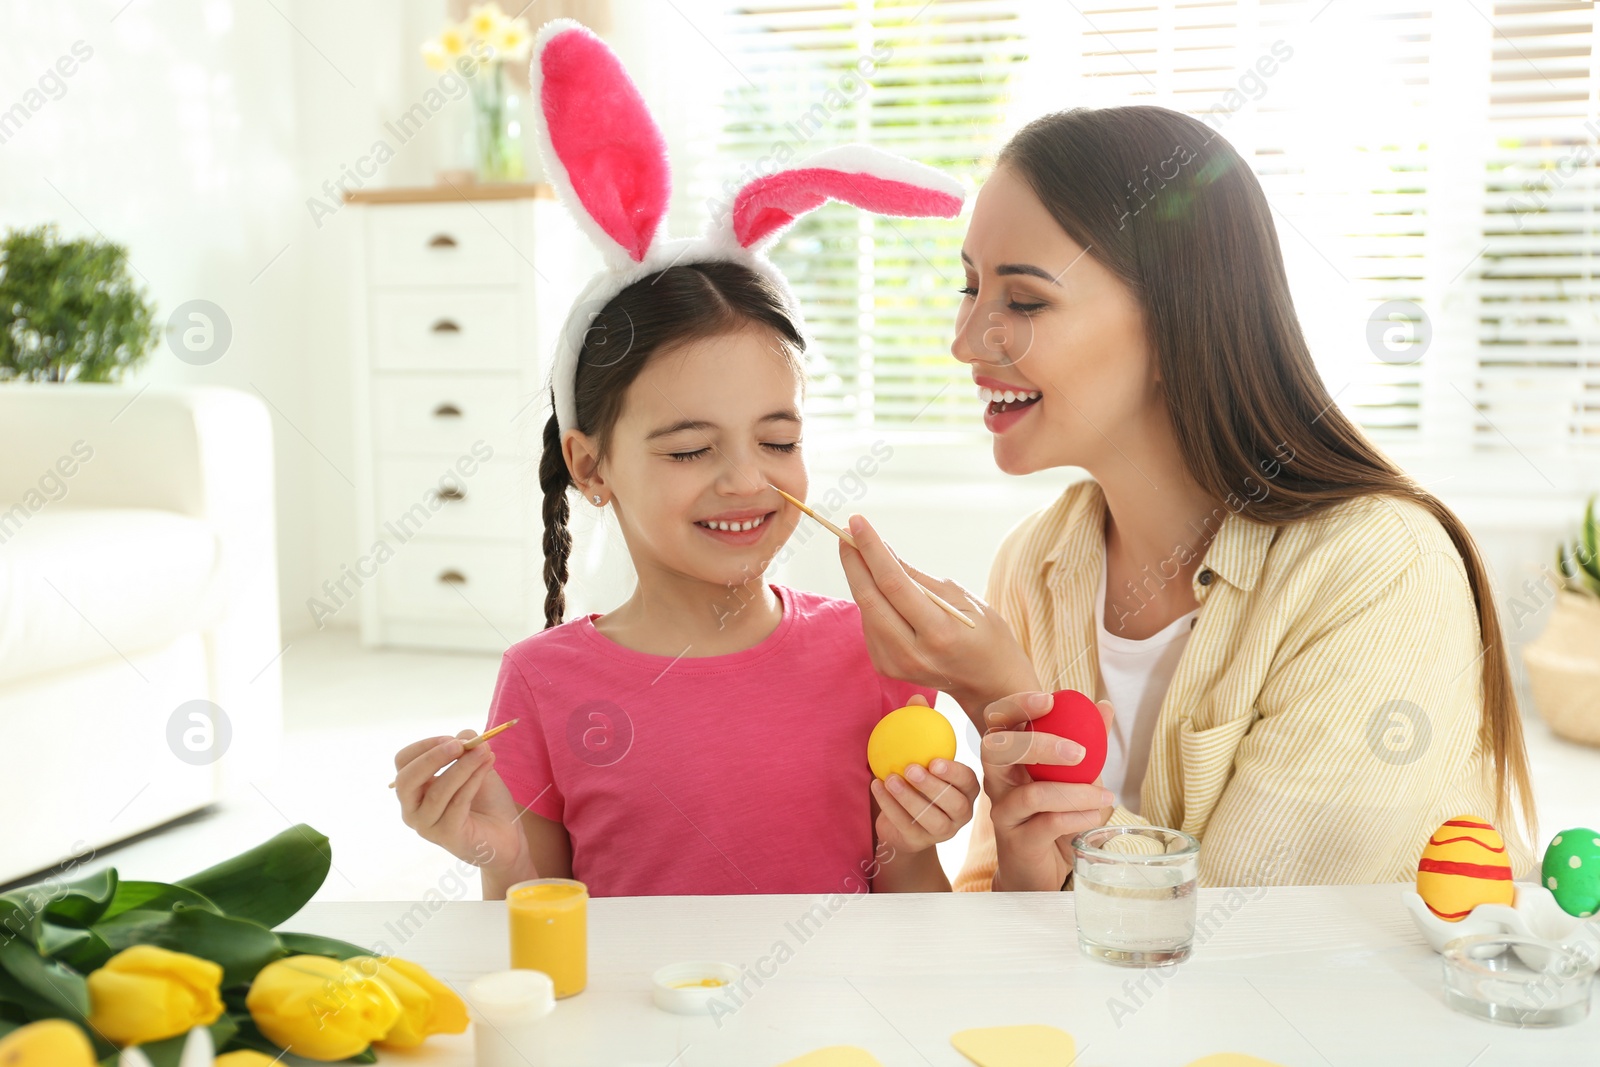 Photo of Happy daughter with bunny ears headband and her mother having fun while painting Easter eggs at home